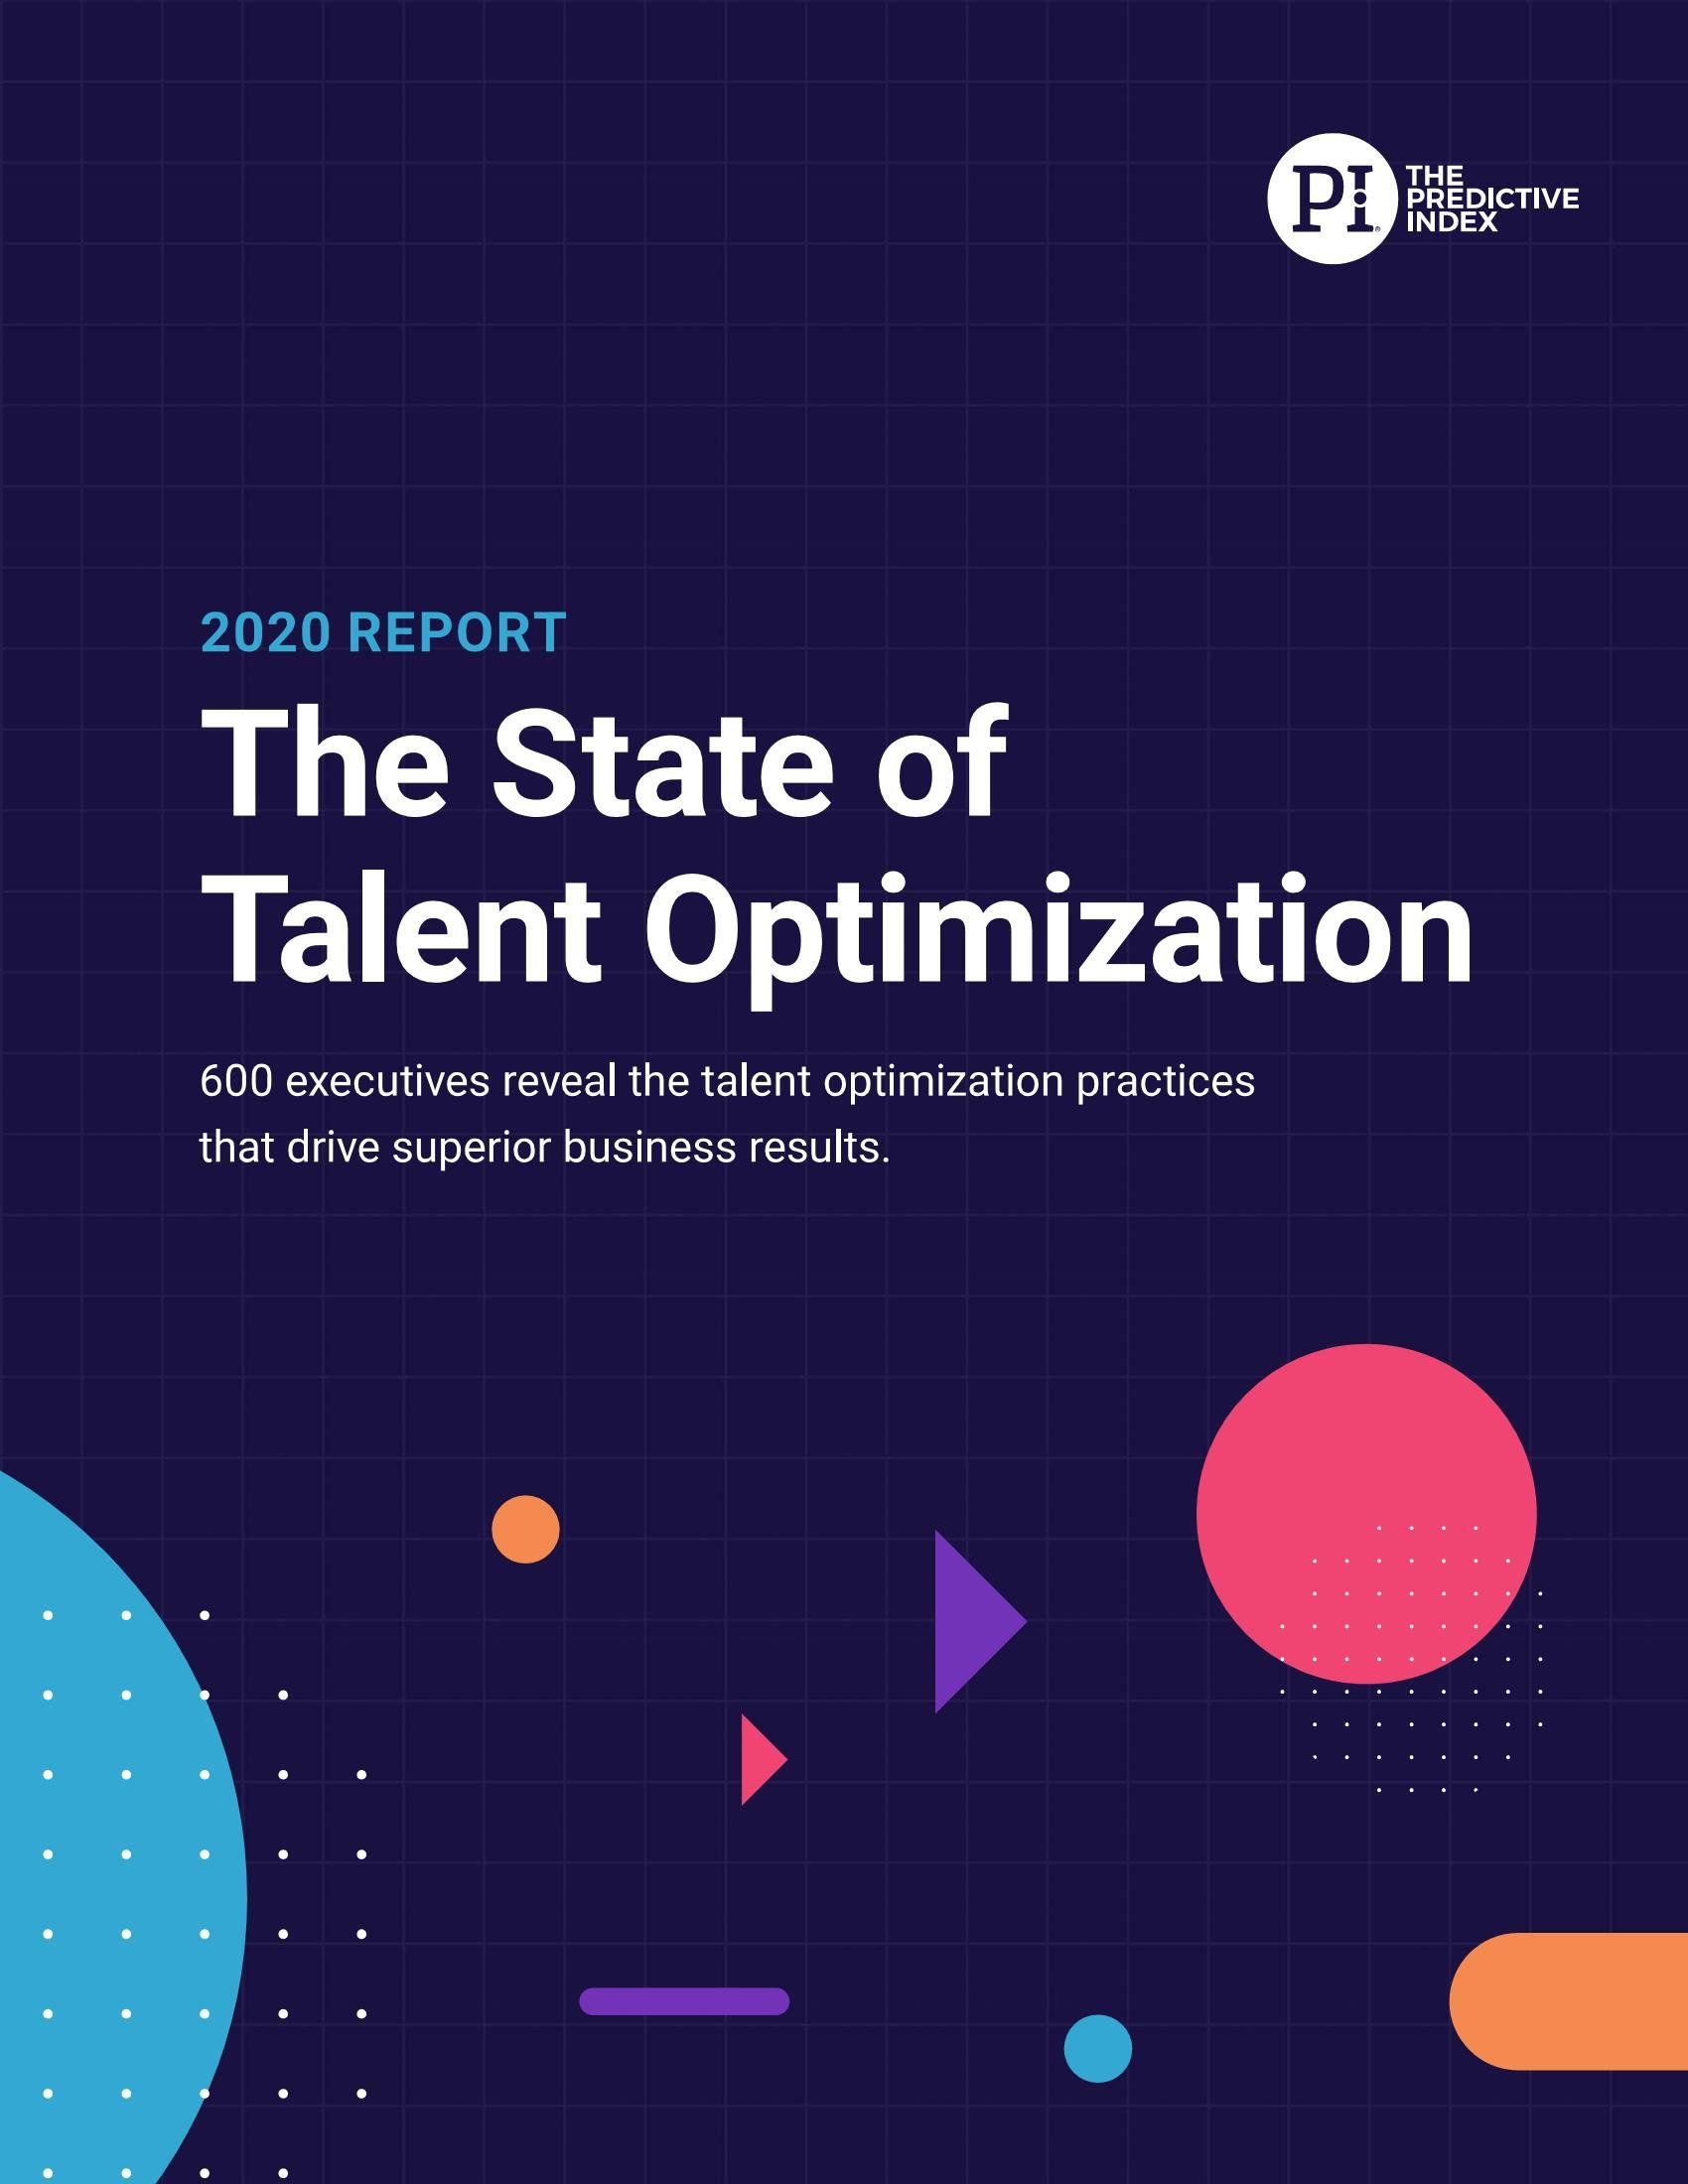 The State of Talent Optimization 2020 Report